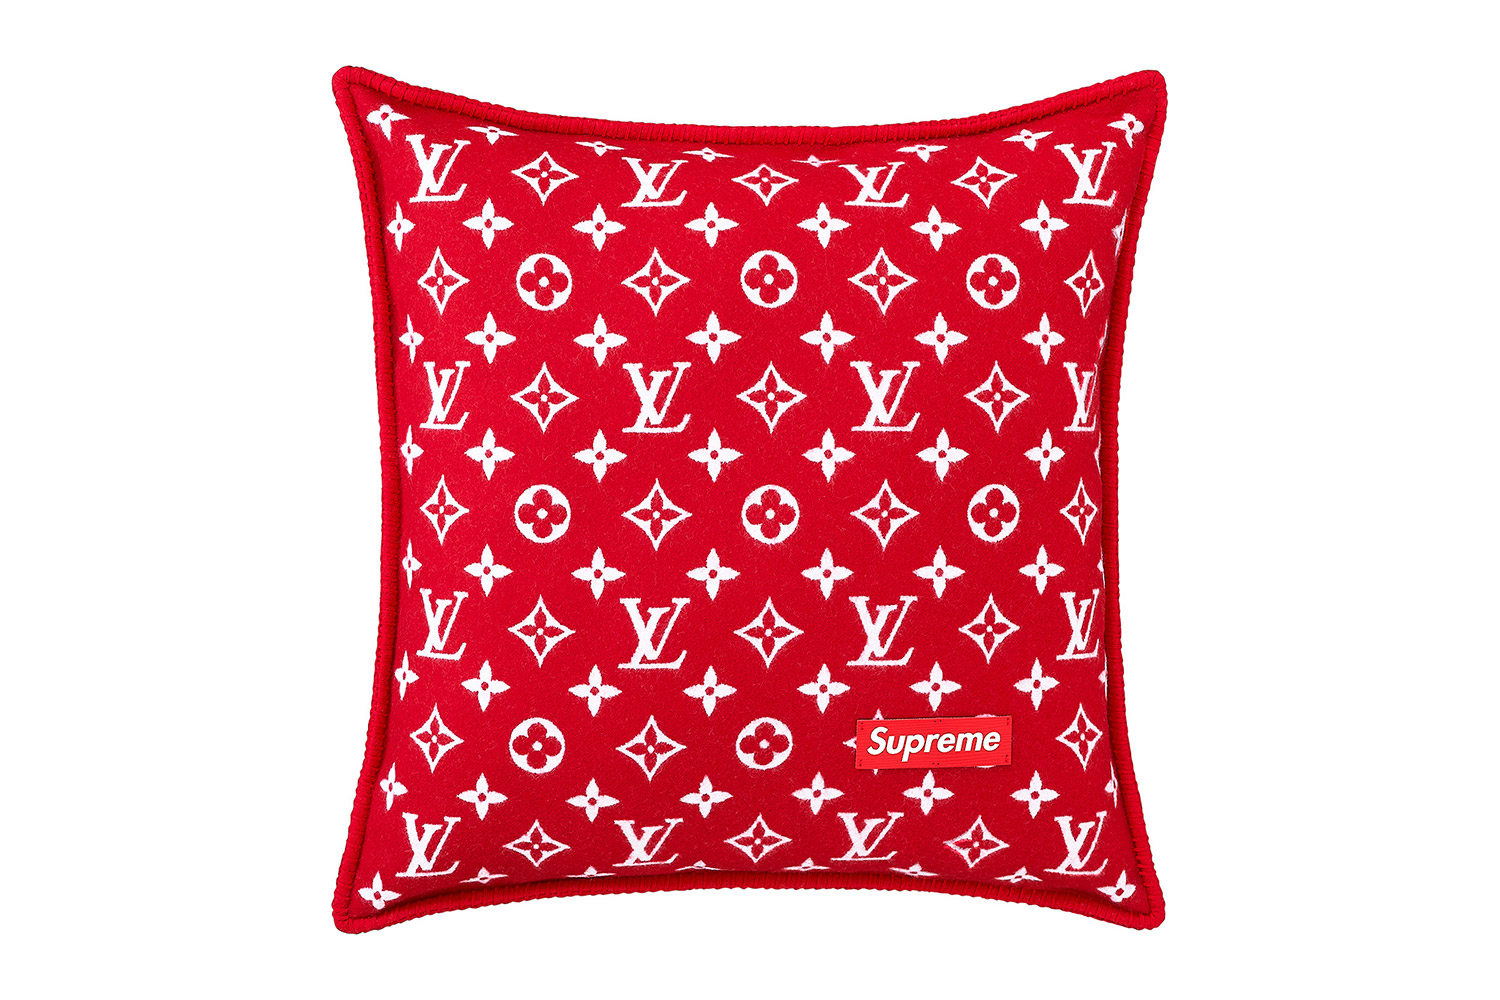 From the Supreme x Louis Vuitton Collection